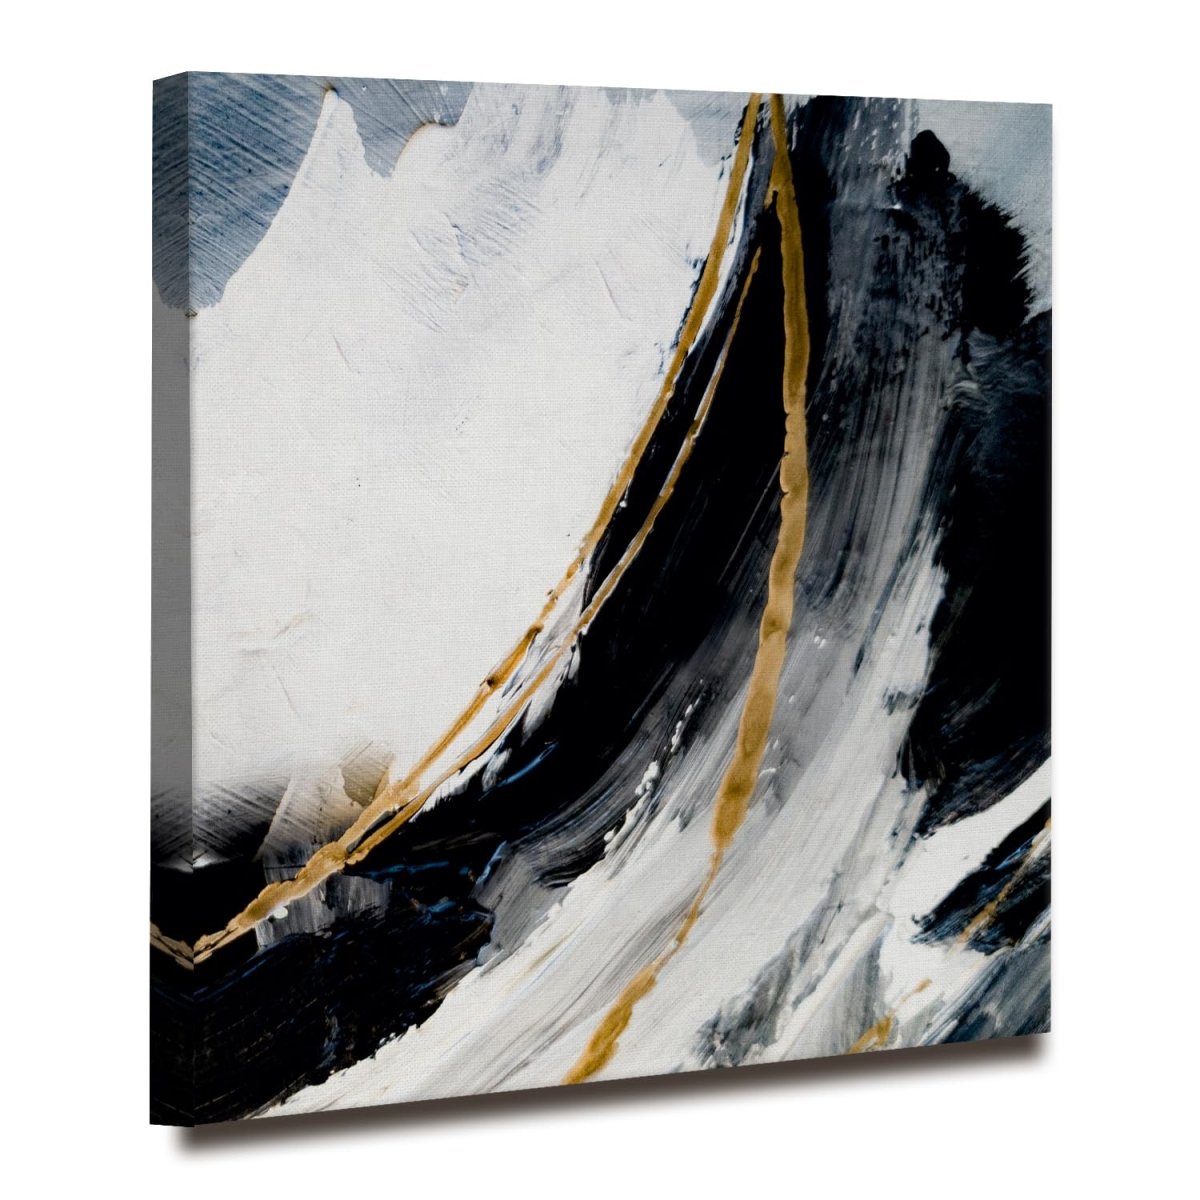 Whispers of Creation Abstract Canvas Wall Art (36 x 36 Inches)